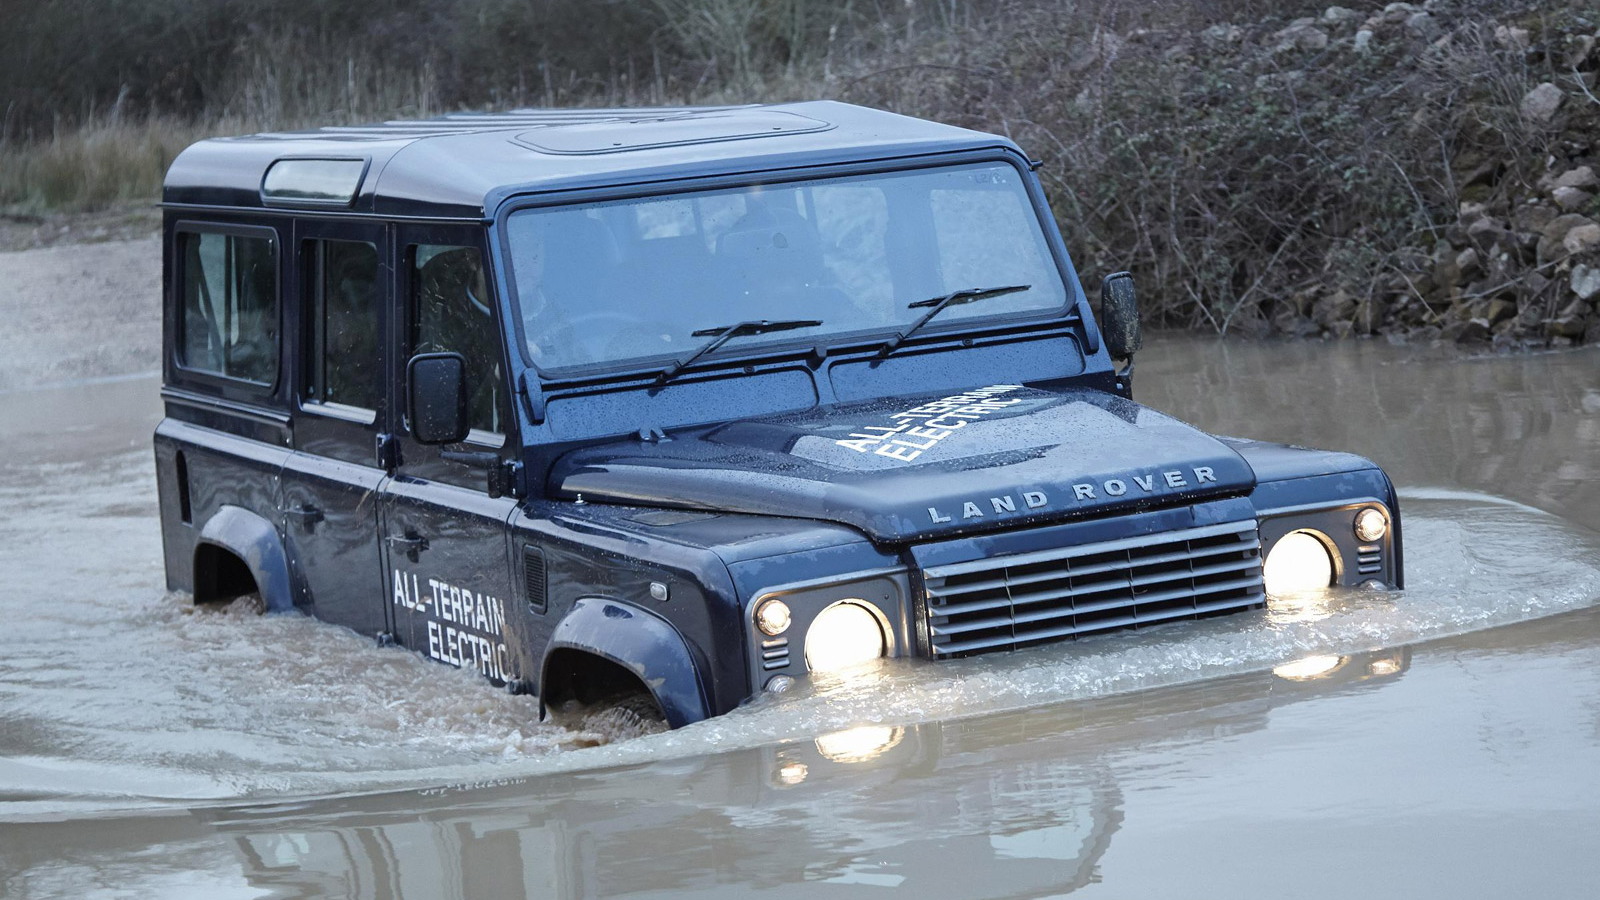 2013 Land Rover Defender All-Terrain Electric